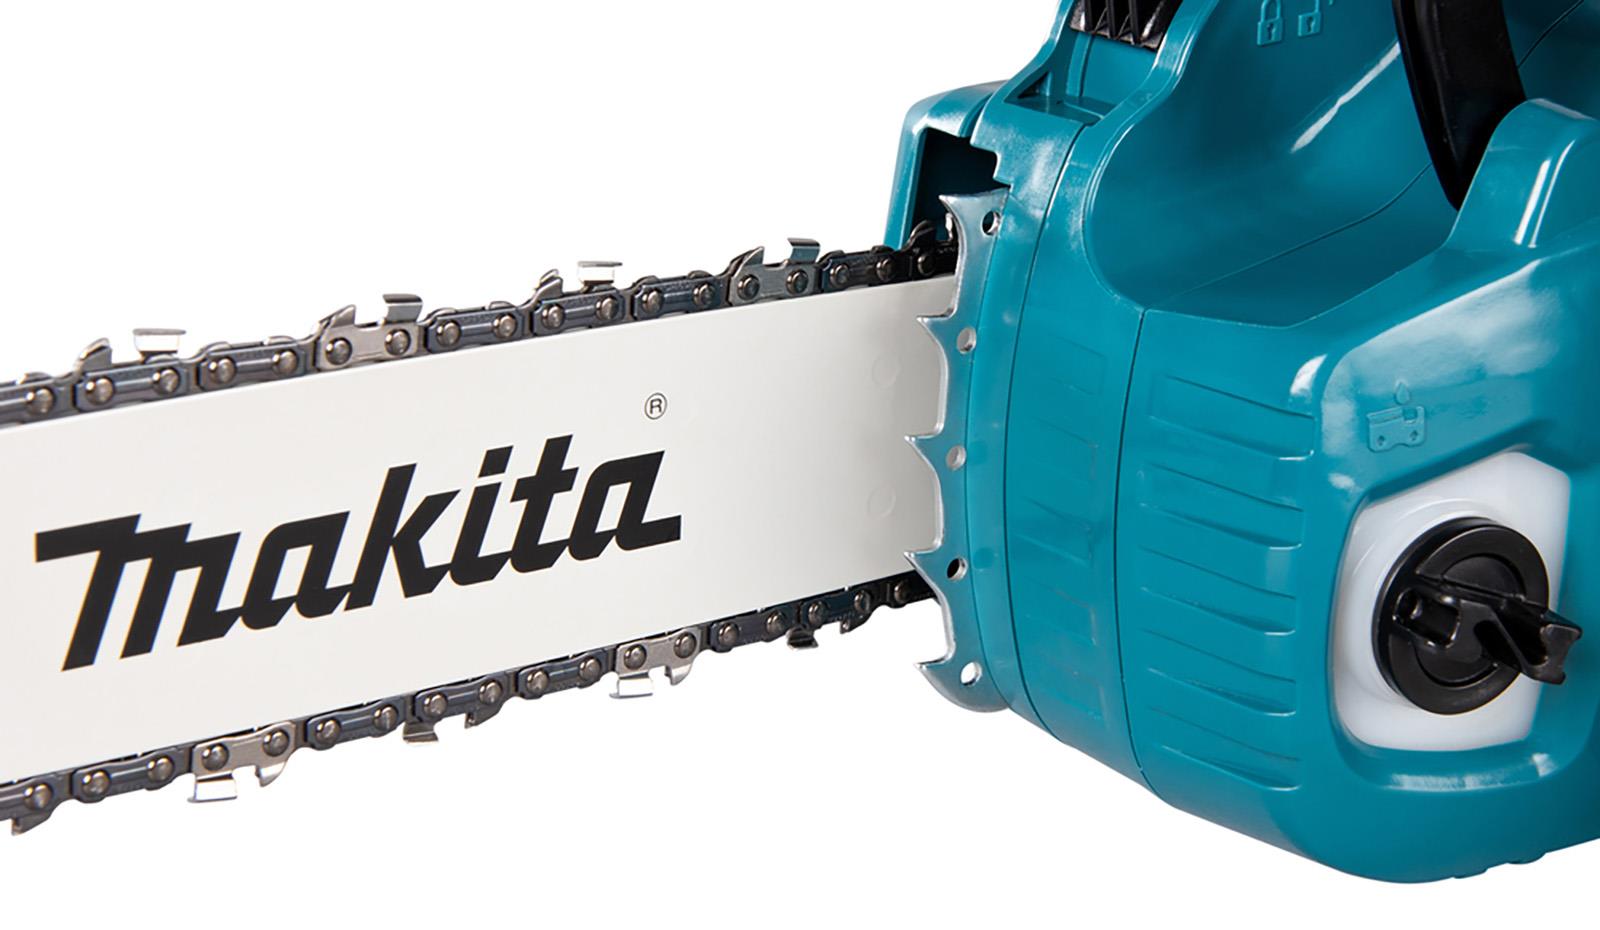 Makita Chainsaw 30cm 12" 18V x 2 LXT Brushless Cordless Garden Tree Cutting Pruning Bare Unit Body Only DUC305Z